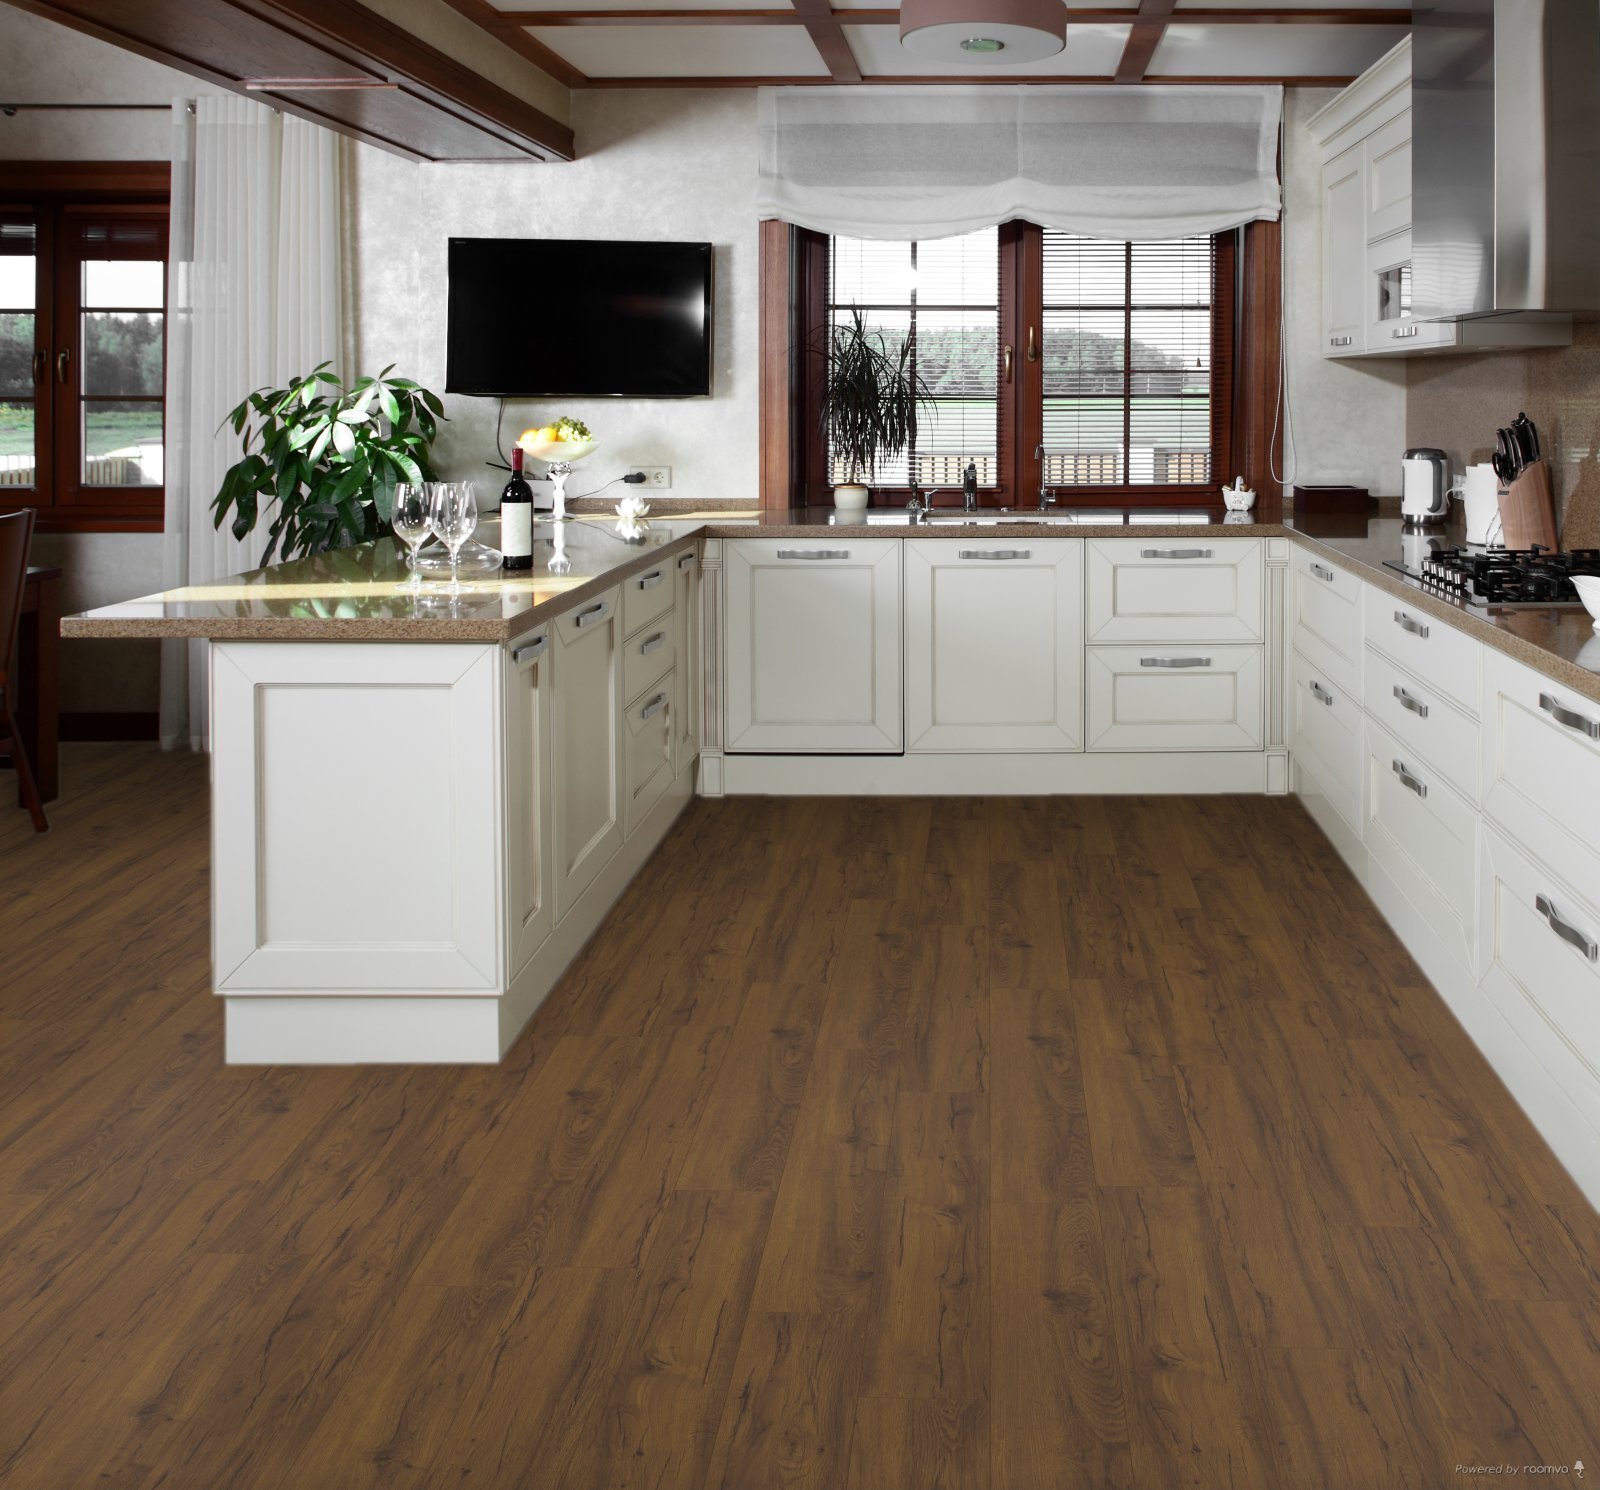 Horizen Flooring presents to you a picture of a quality wide plank Camden luxury vinyl plank. NovoCore Premium EIR collection features a wide range of colors & designs that will compliment any interior. Natural wood grain synchronized surface allow for an authentic hardwood look & feel. This collection features a 0.25″ / 6.5 mm overall thickness and a durable 22 mil / 0.55 mm wear layer for residential and commercial applications.